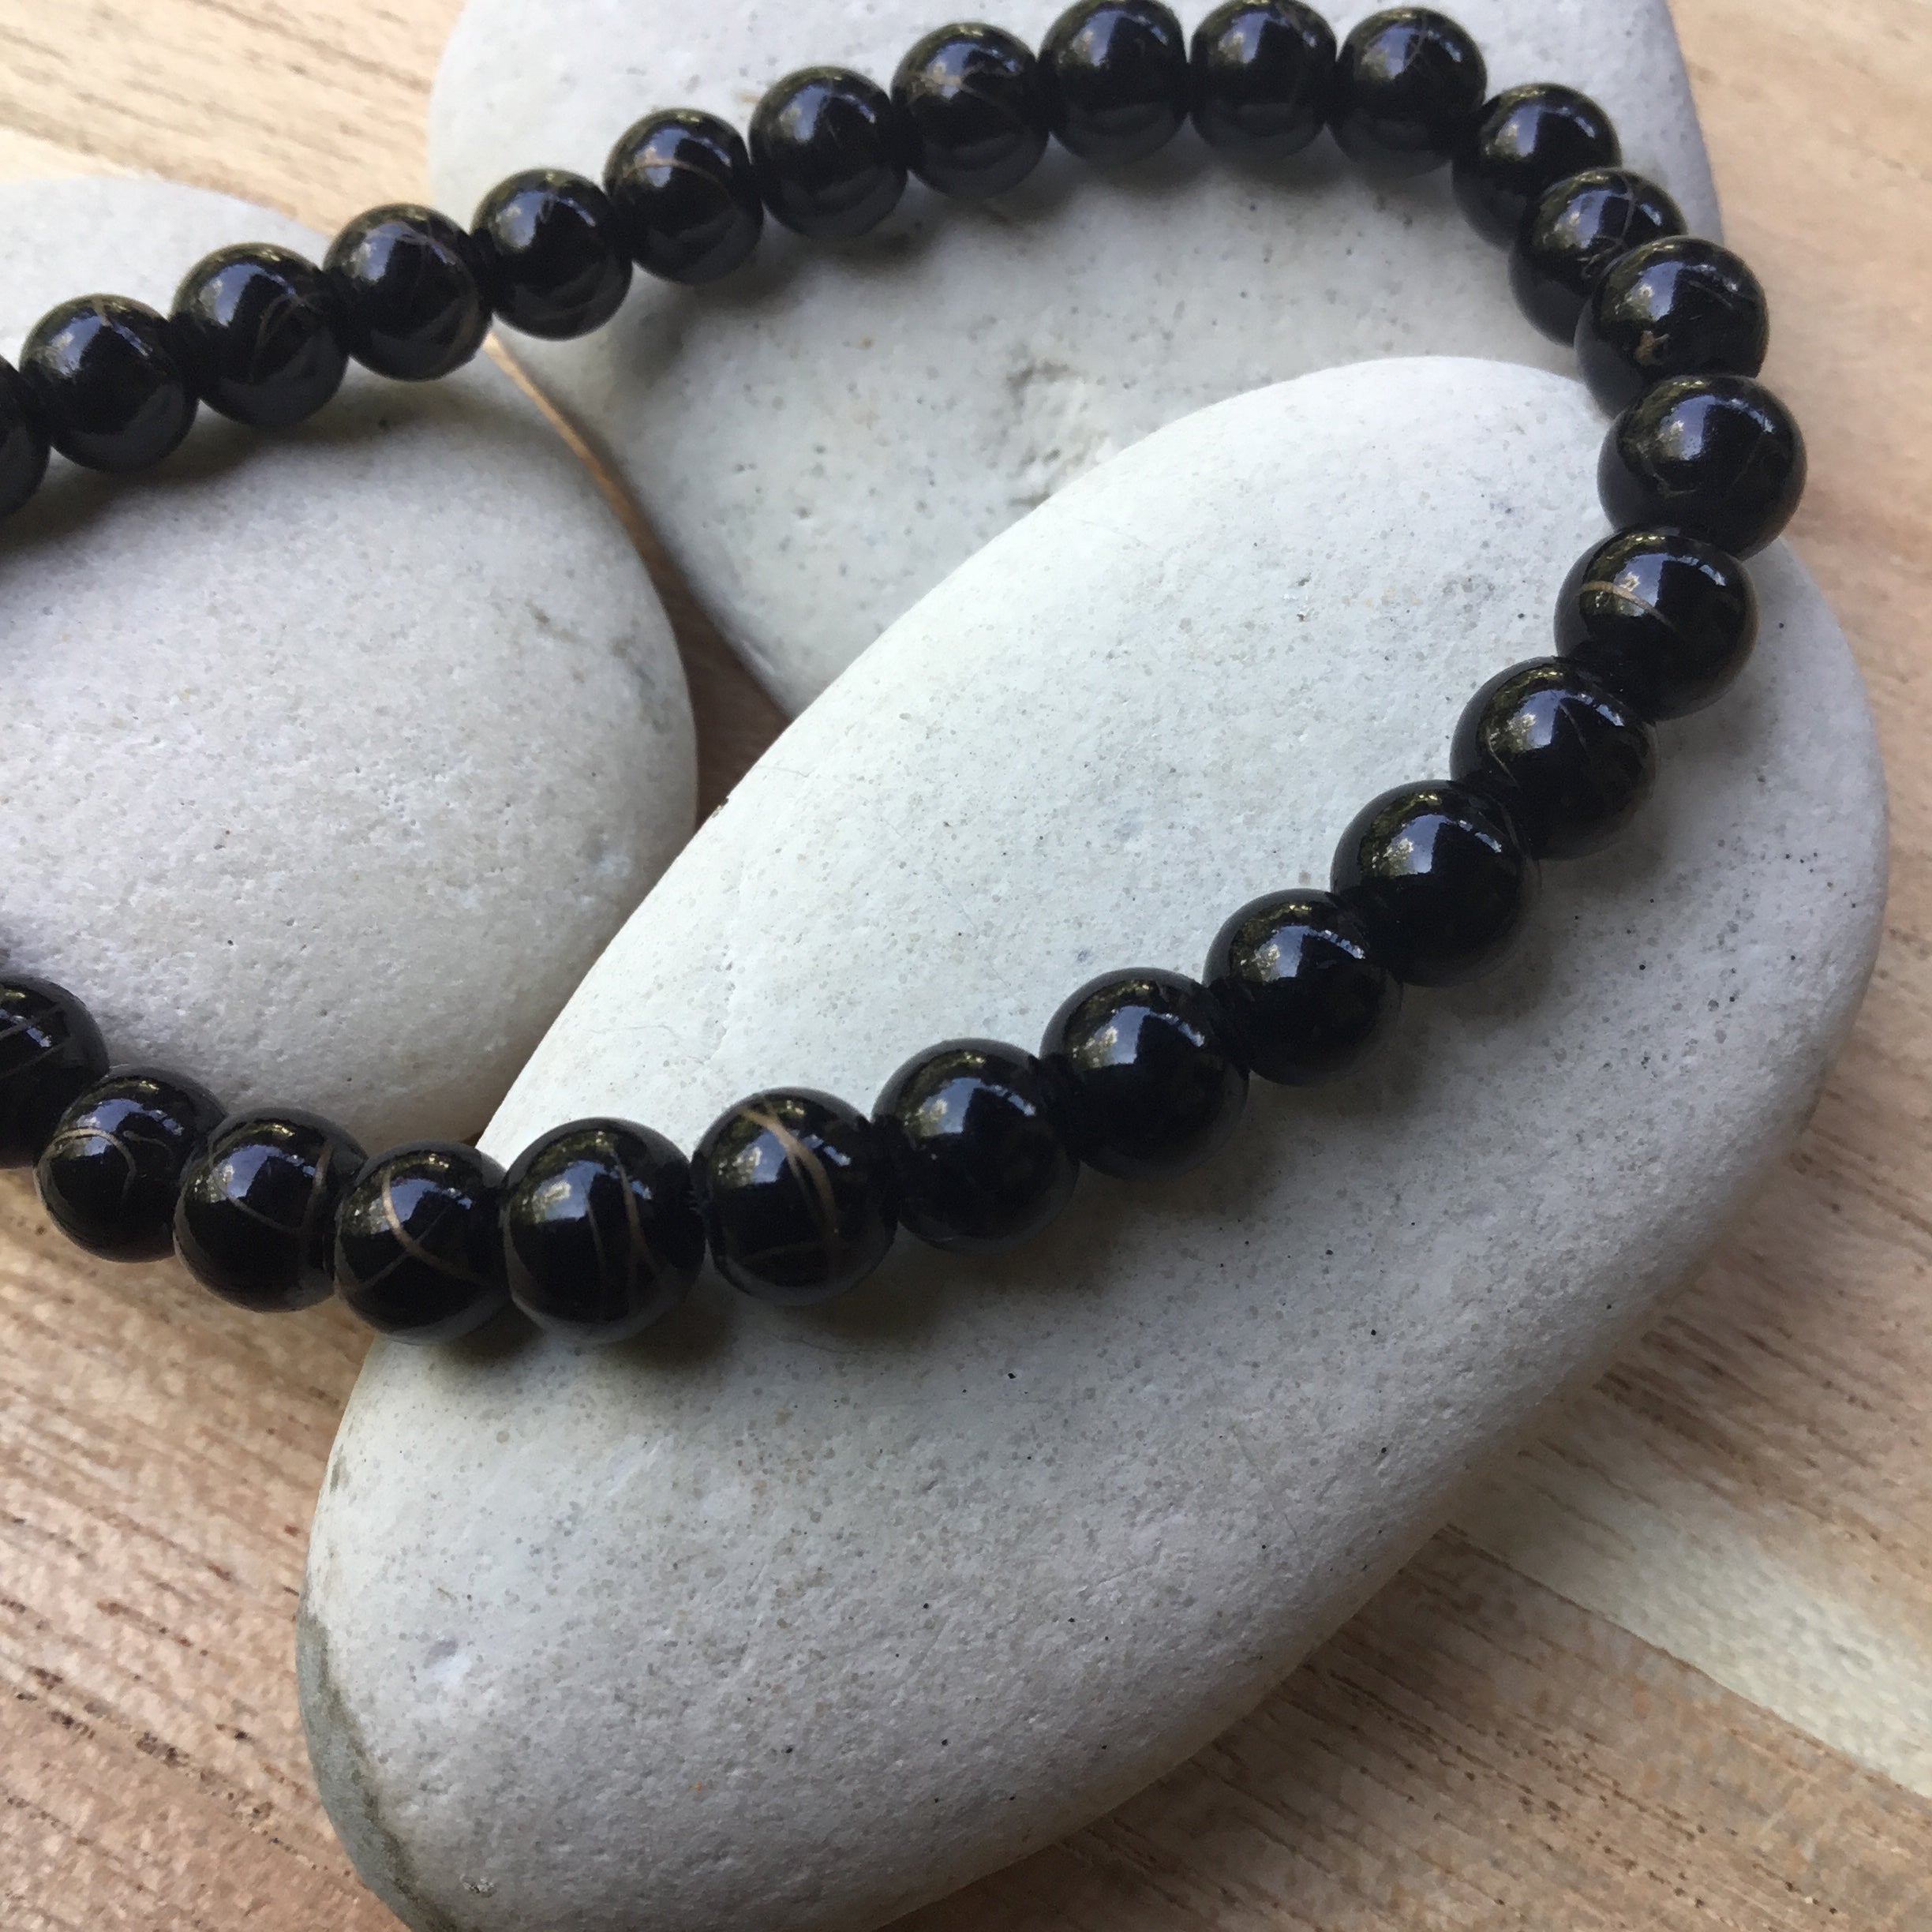 Amazon.com: FORZIANI 8mm Natural Shiny Black Onyx Stretch Bracelet -  Traveler's Protection - High Quality Spiritual Beaded Bracelet for Men -  Adjustable Size - Made in USA : Handmade Products